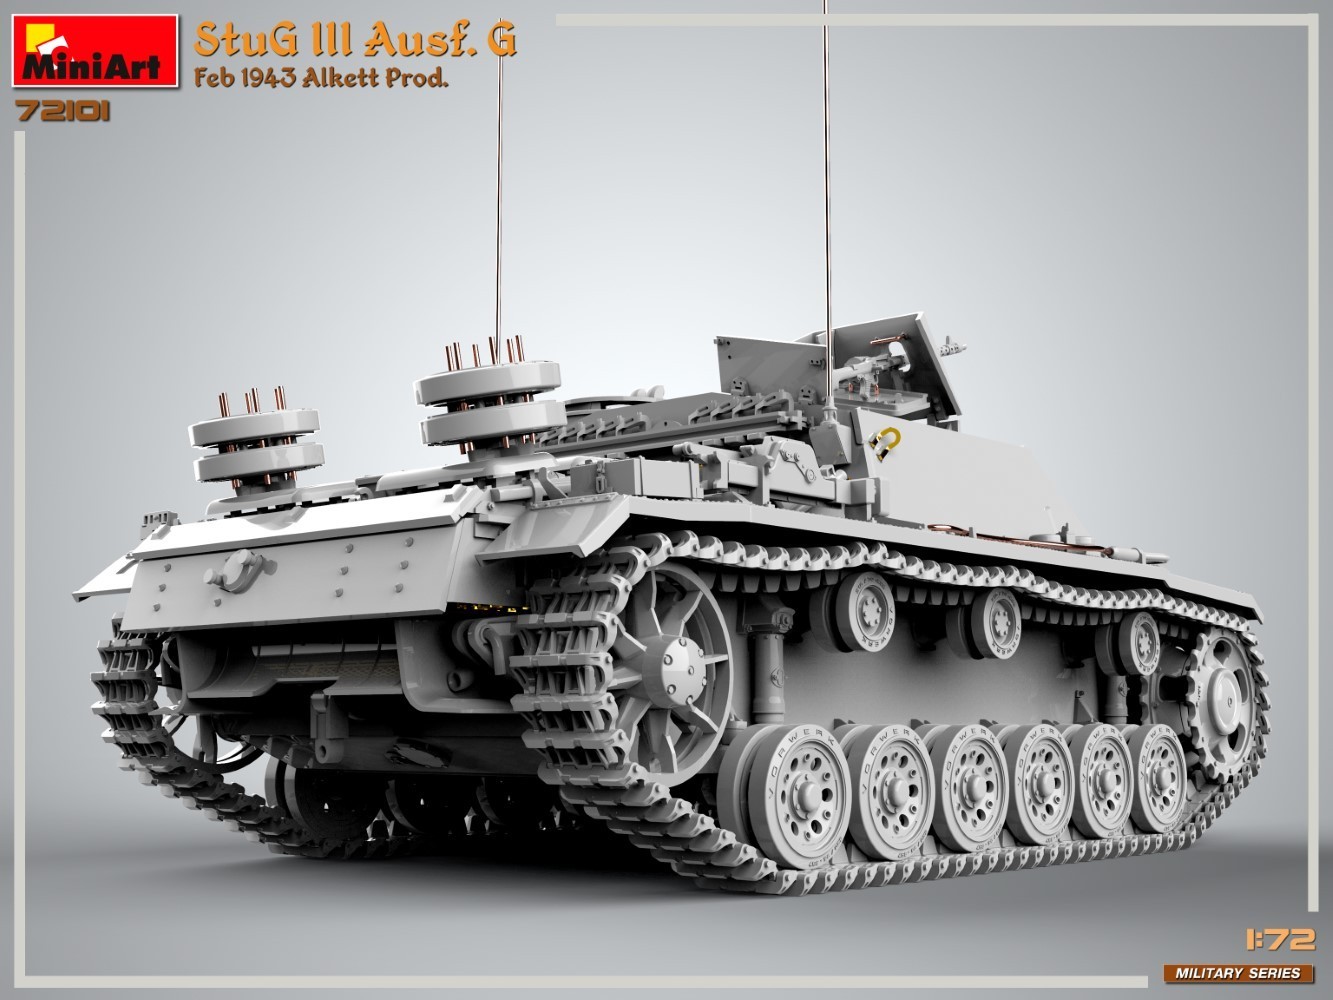 New Military Series Announced in 1/72 Scale, Starting with StuG III Ausf. G CAD-8